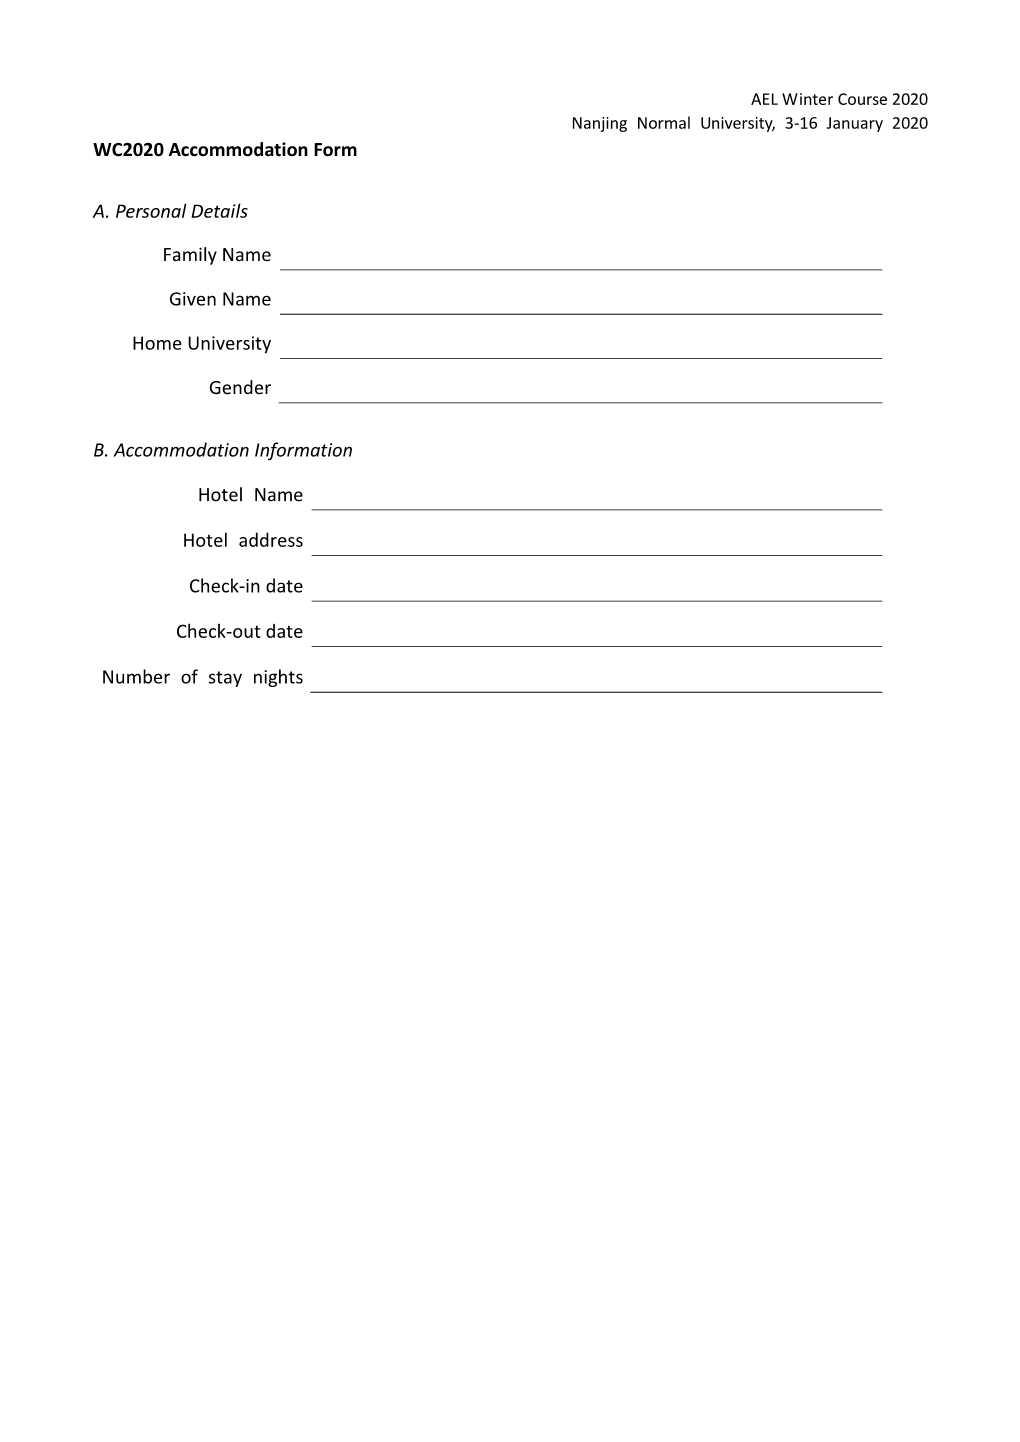 WC2020 Accommodation Form A. Personal Details Family Name